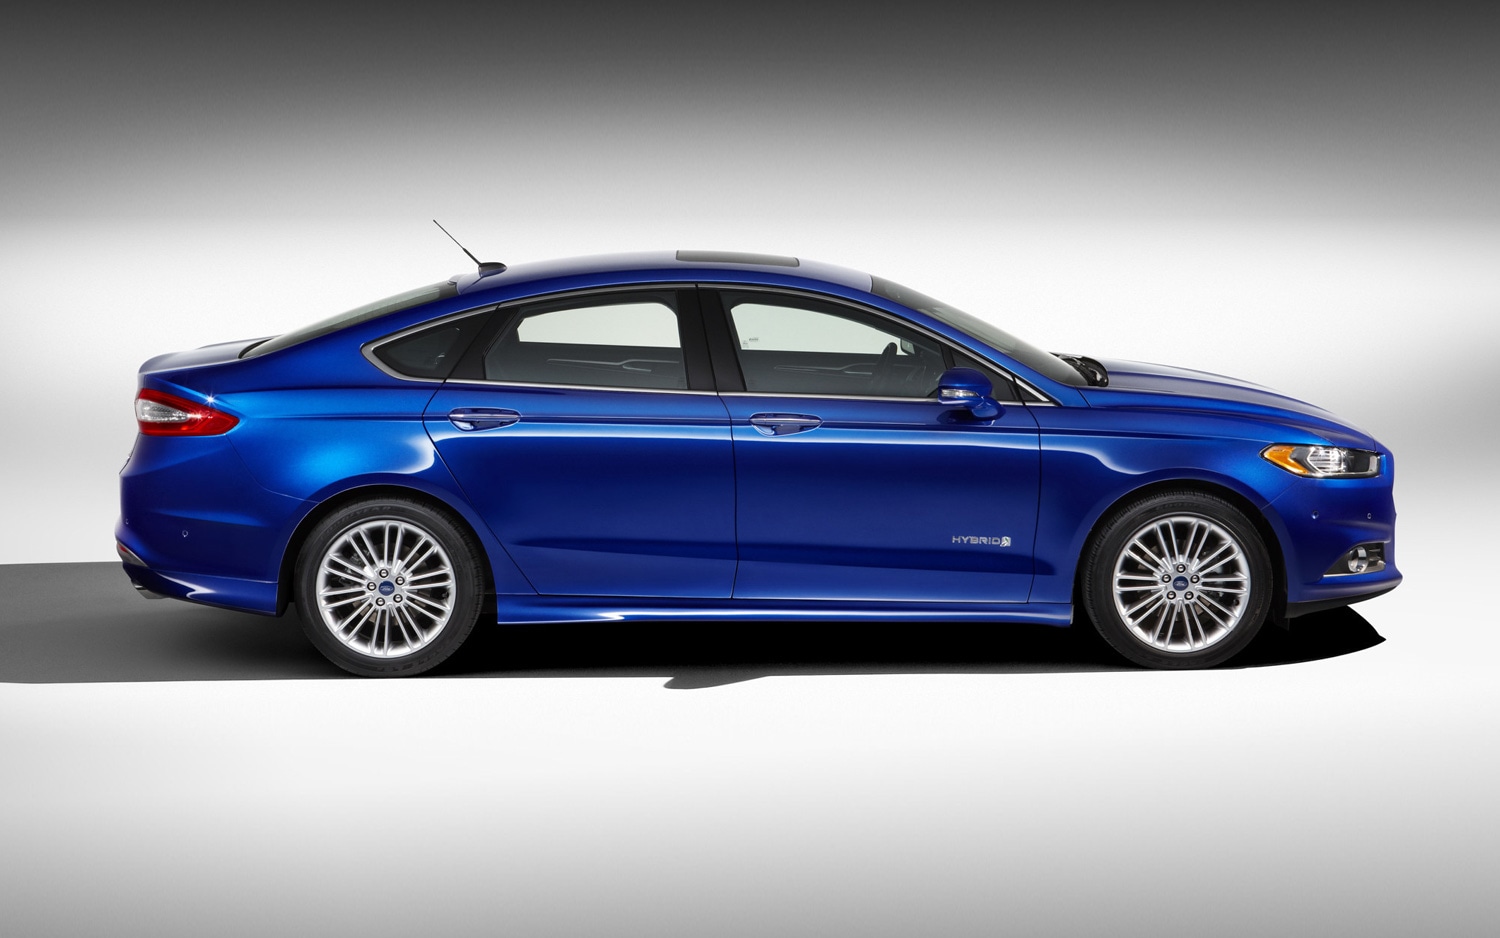 Official: 2013 Ford Fusion Hybrid Returns 47/47/47 MPG